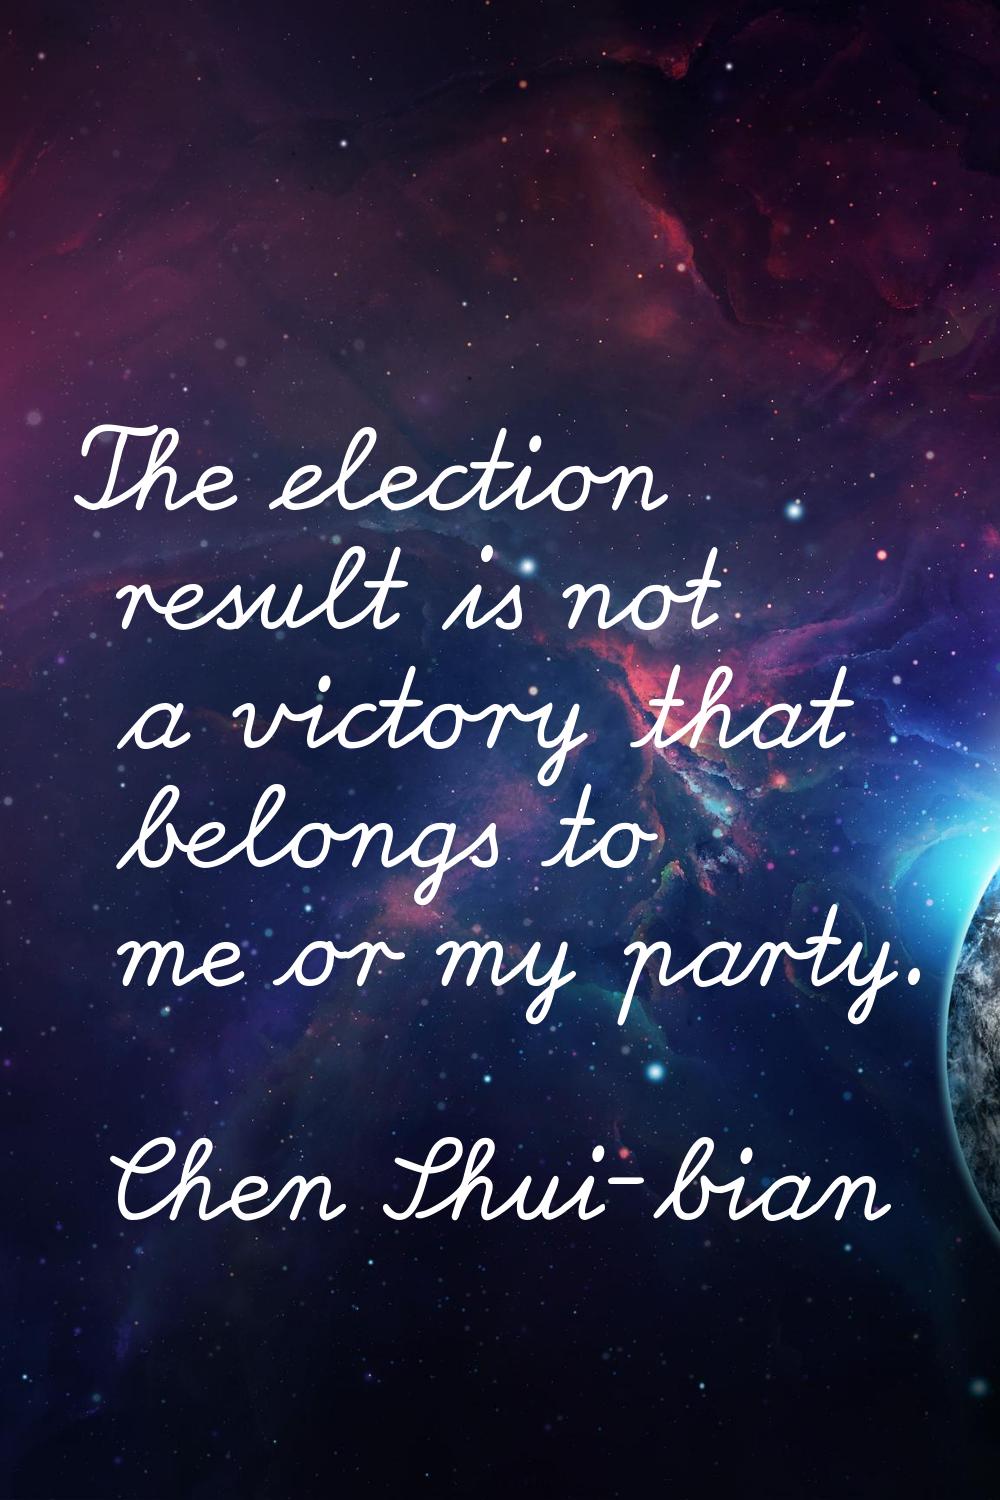 The election result is not a victory that belongs to me or my party.